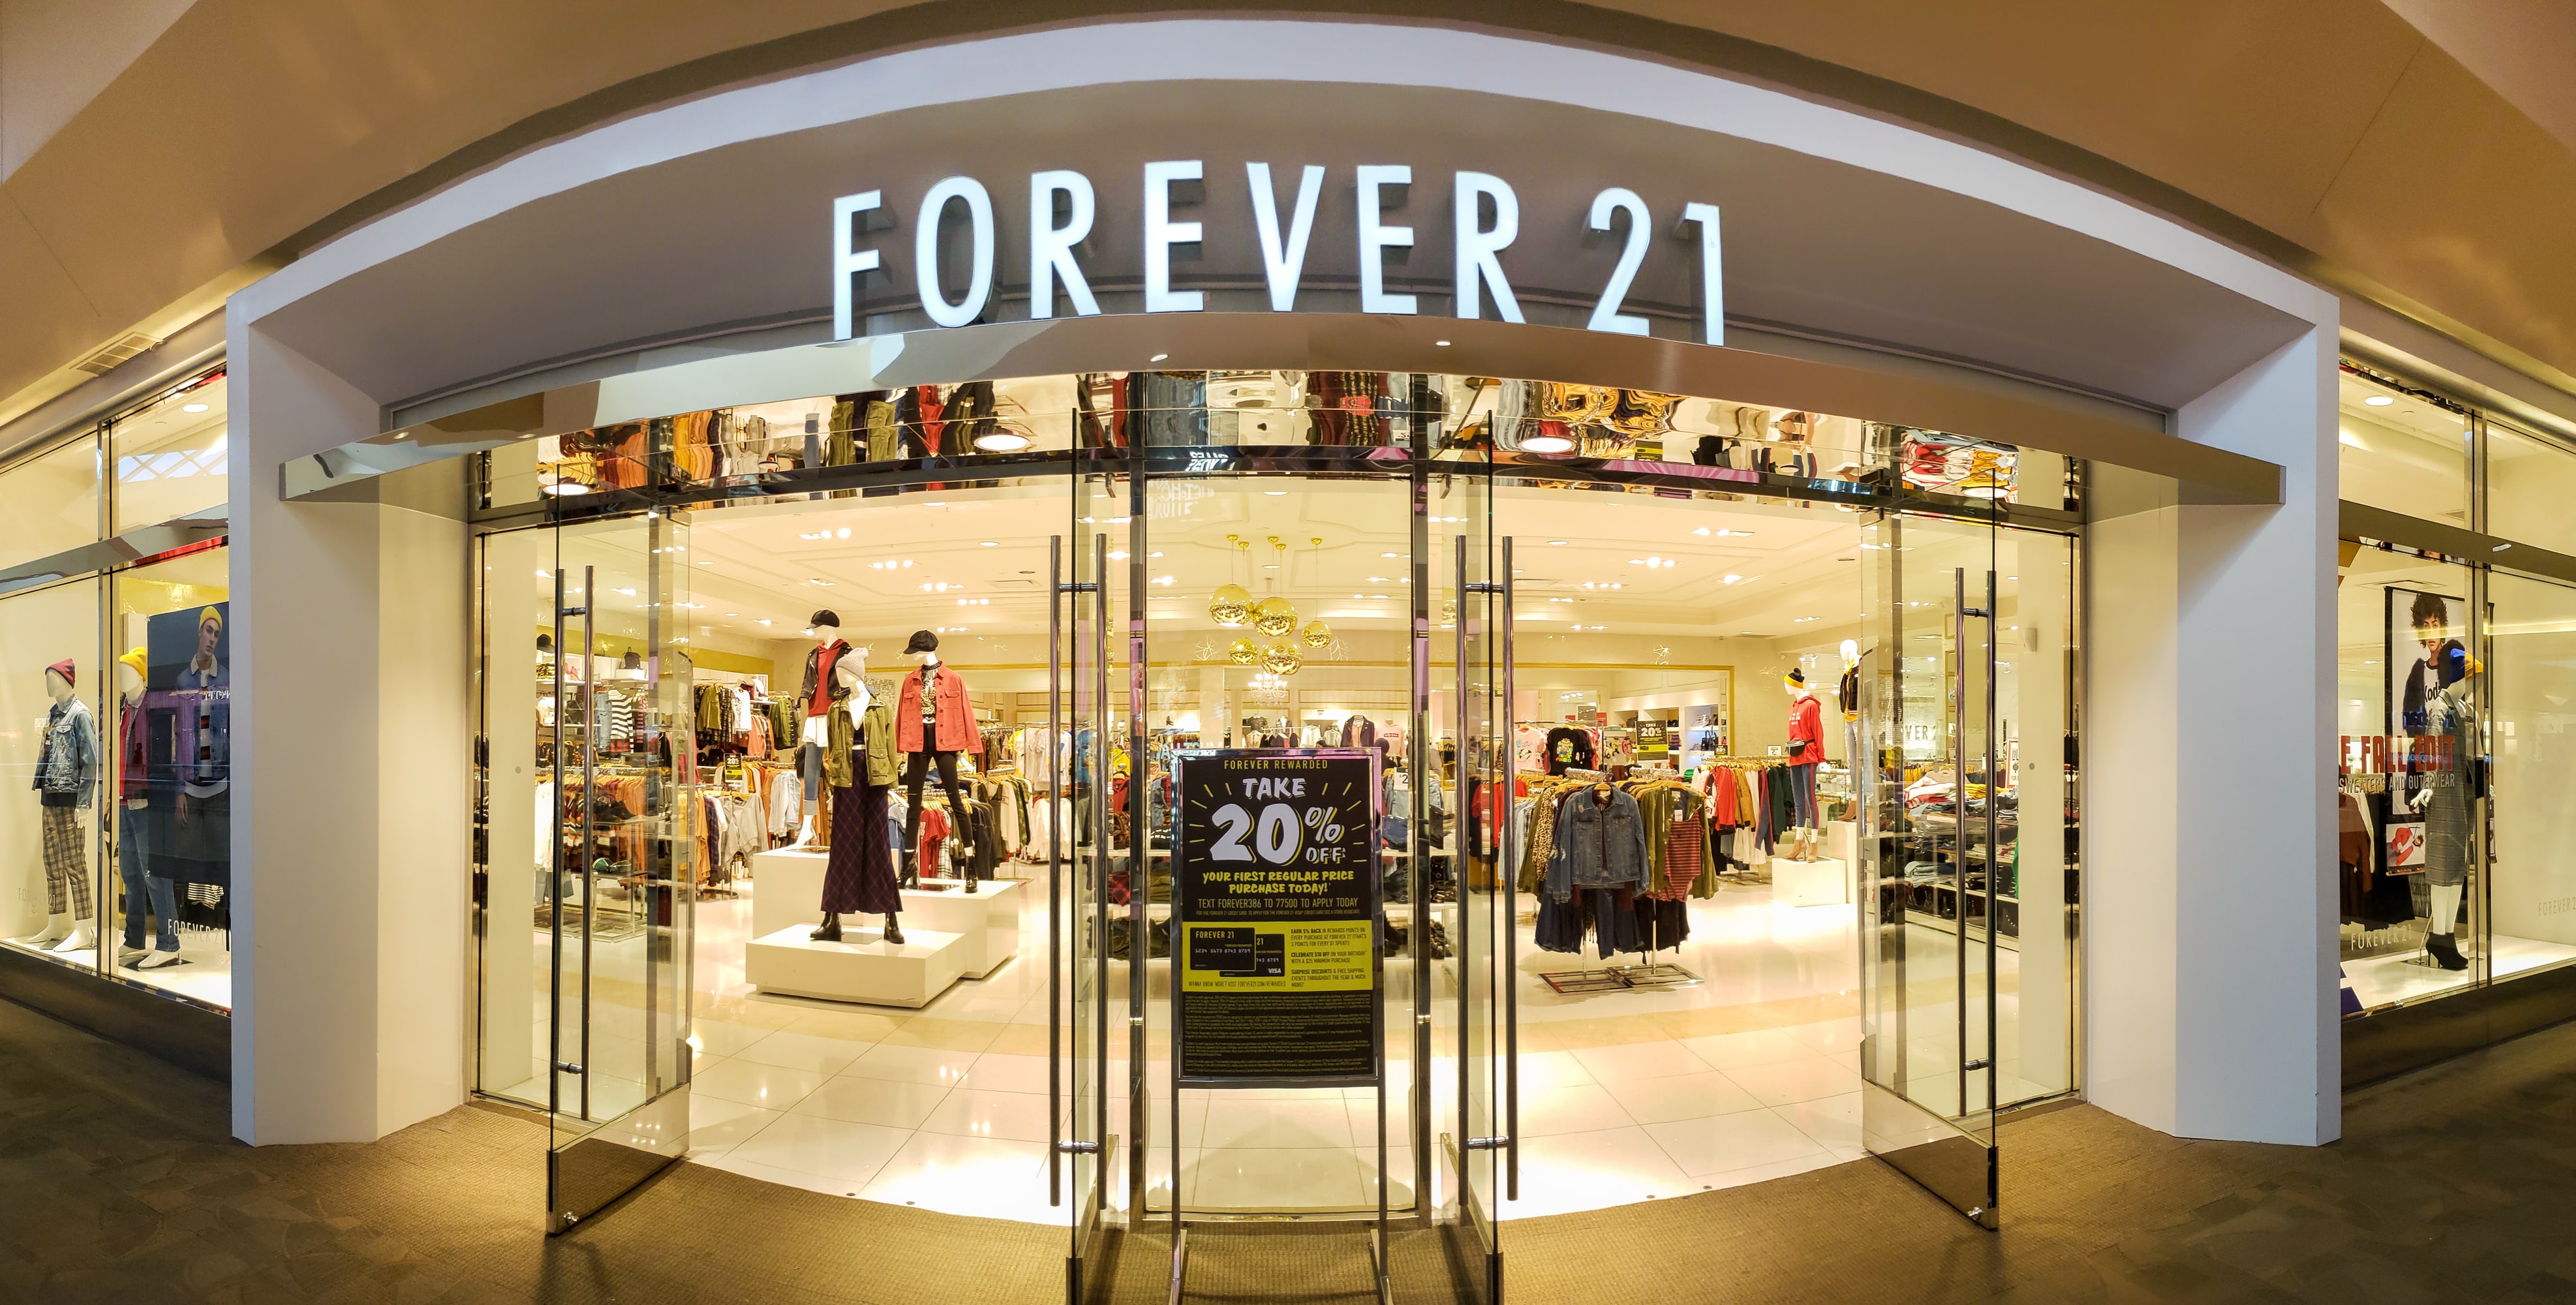 Why Did Forever 21 File For Bankruptcy?